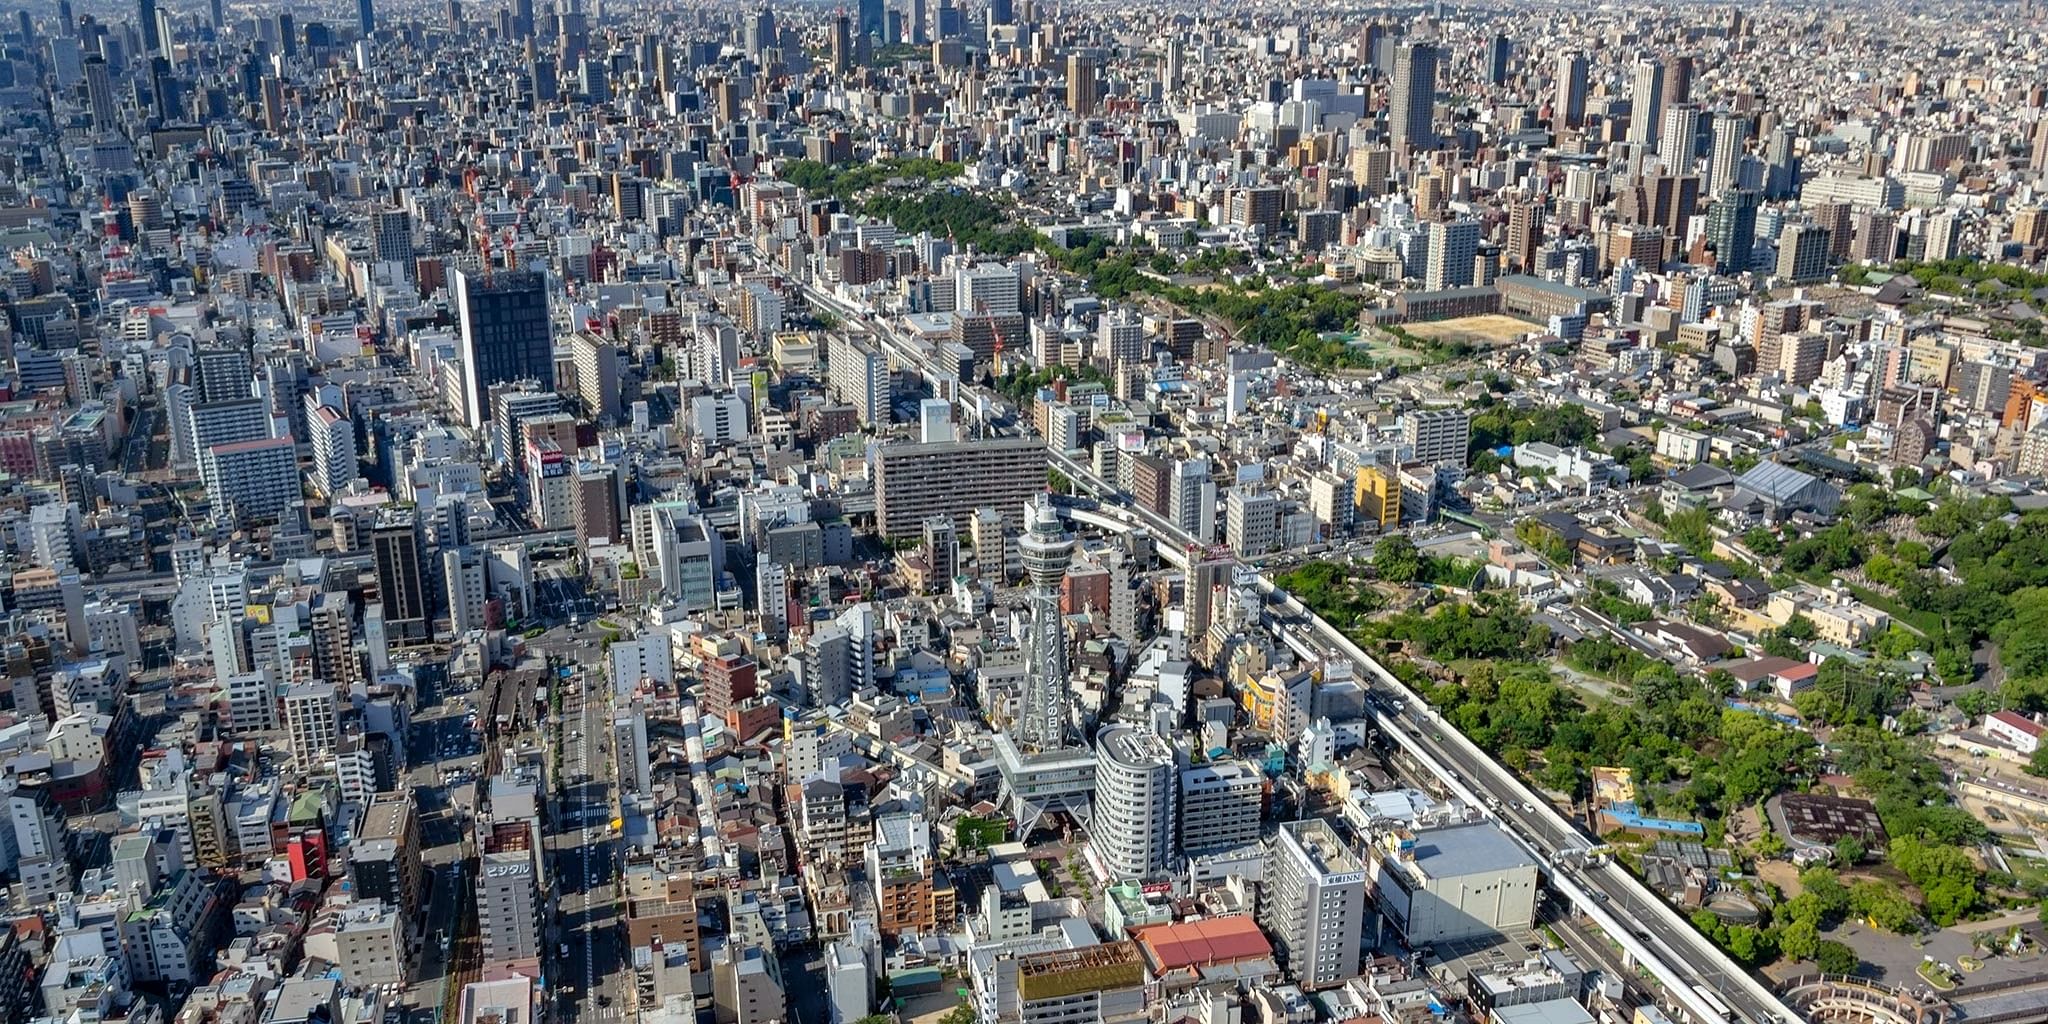 Helicopter tour - Explore OSAKA From the Skies